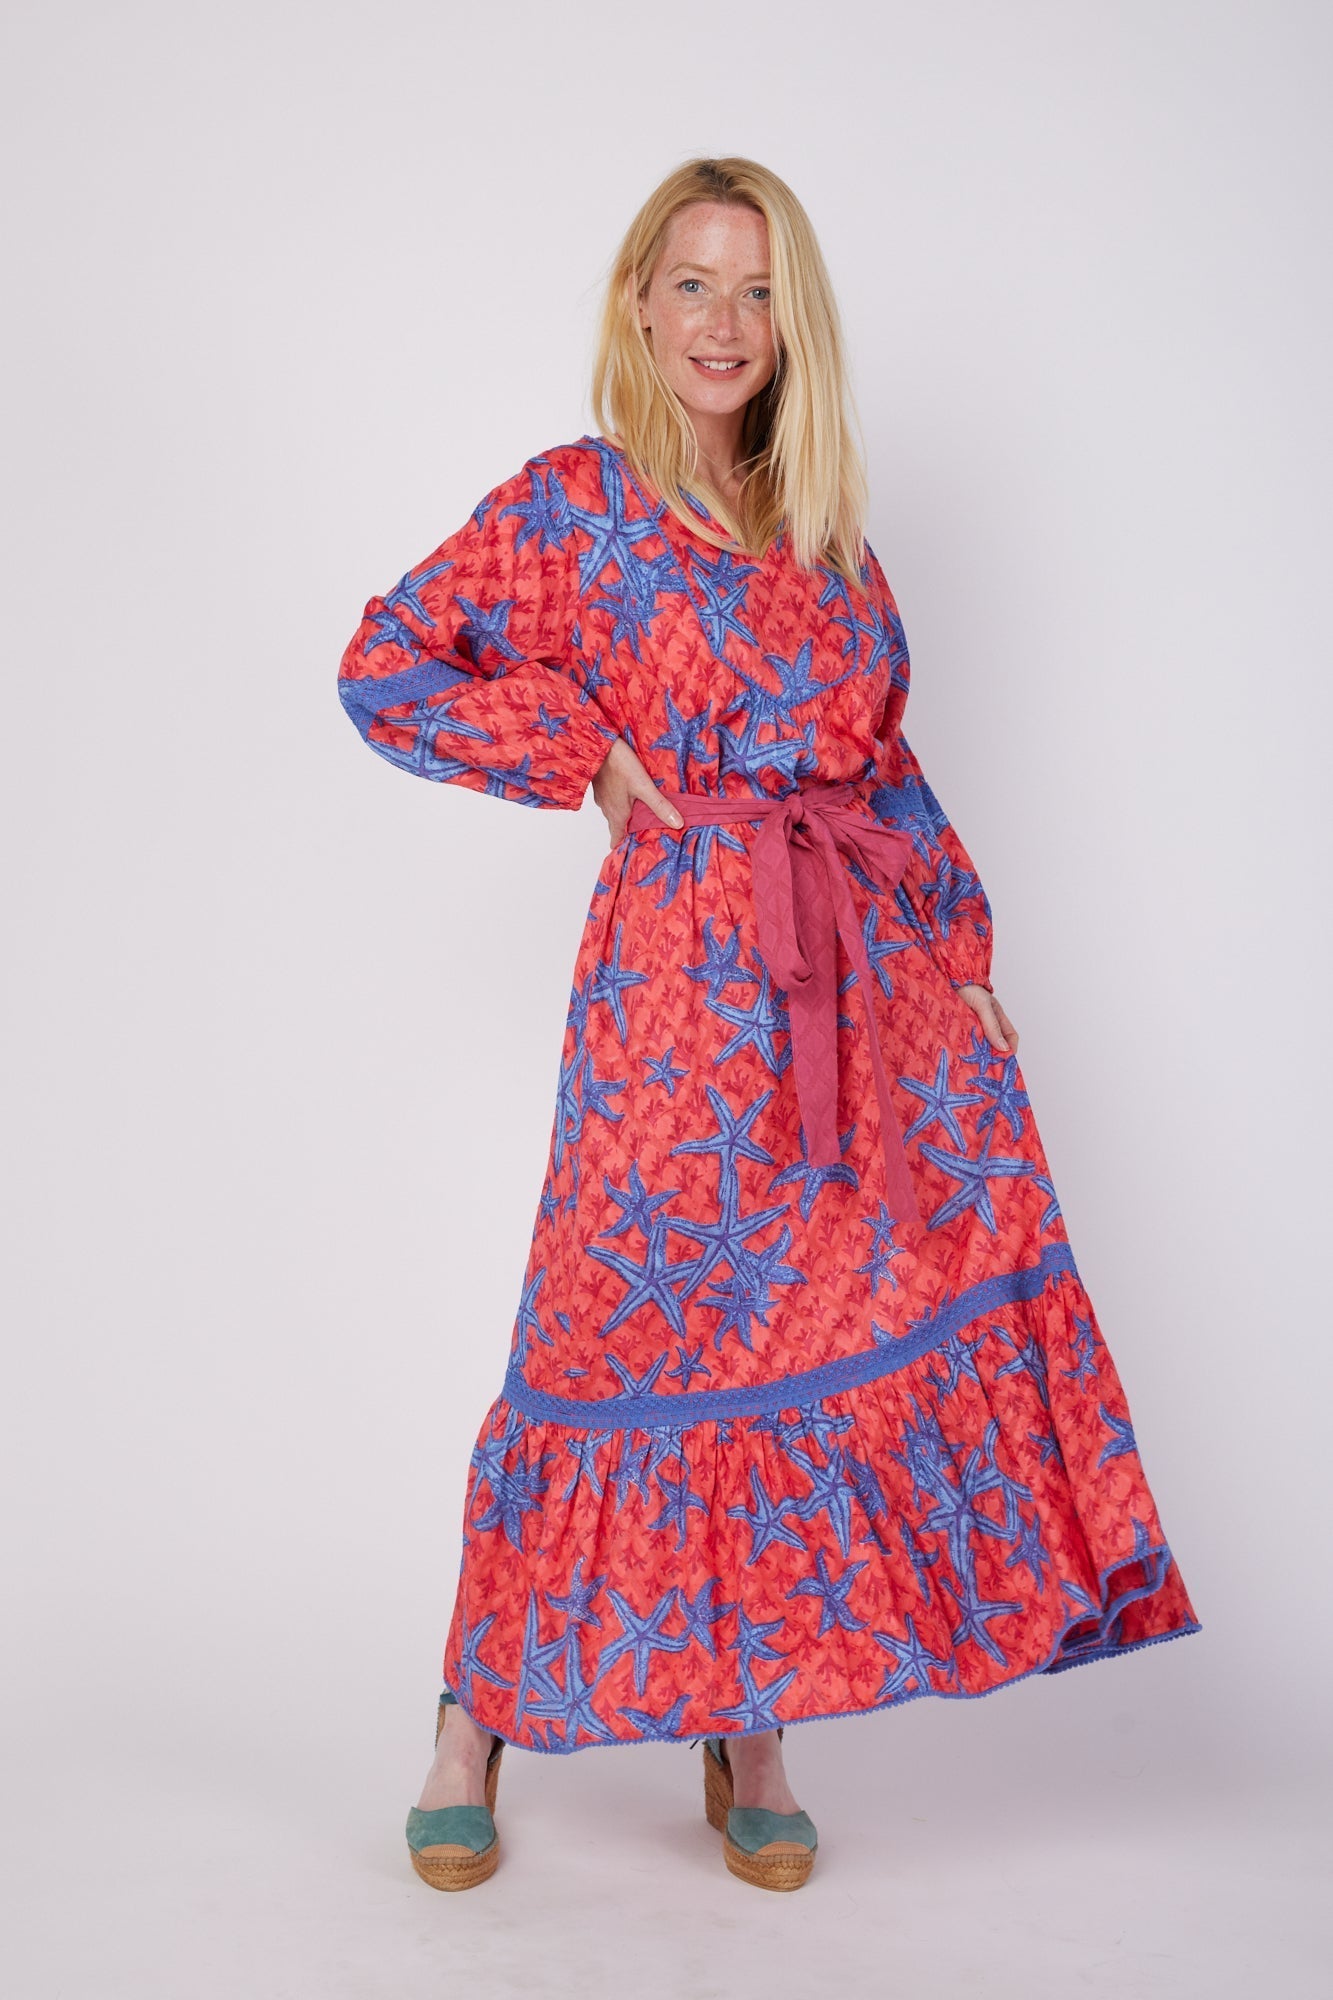 ModaPosa Ilaria Puff Sleeve Embroidered Maxi Dress with Lace Trim in Starfish Scales . Discover women's resort dresses and lifestyle clothing inspired by the Mediterranean. Free worldwide shipping available!